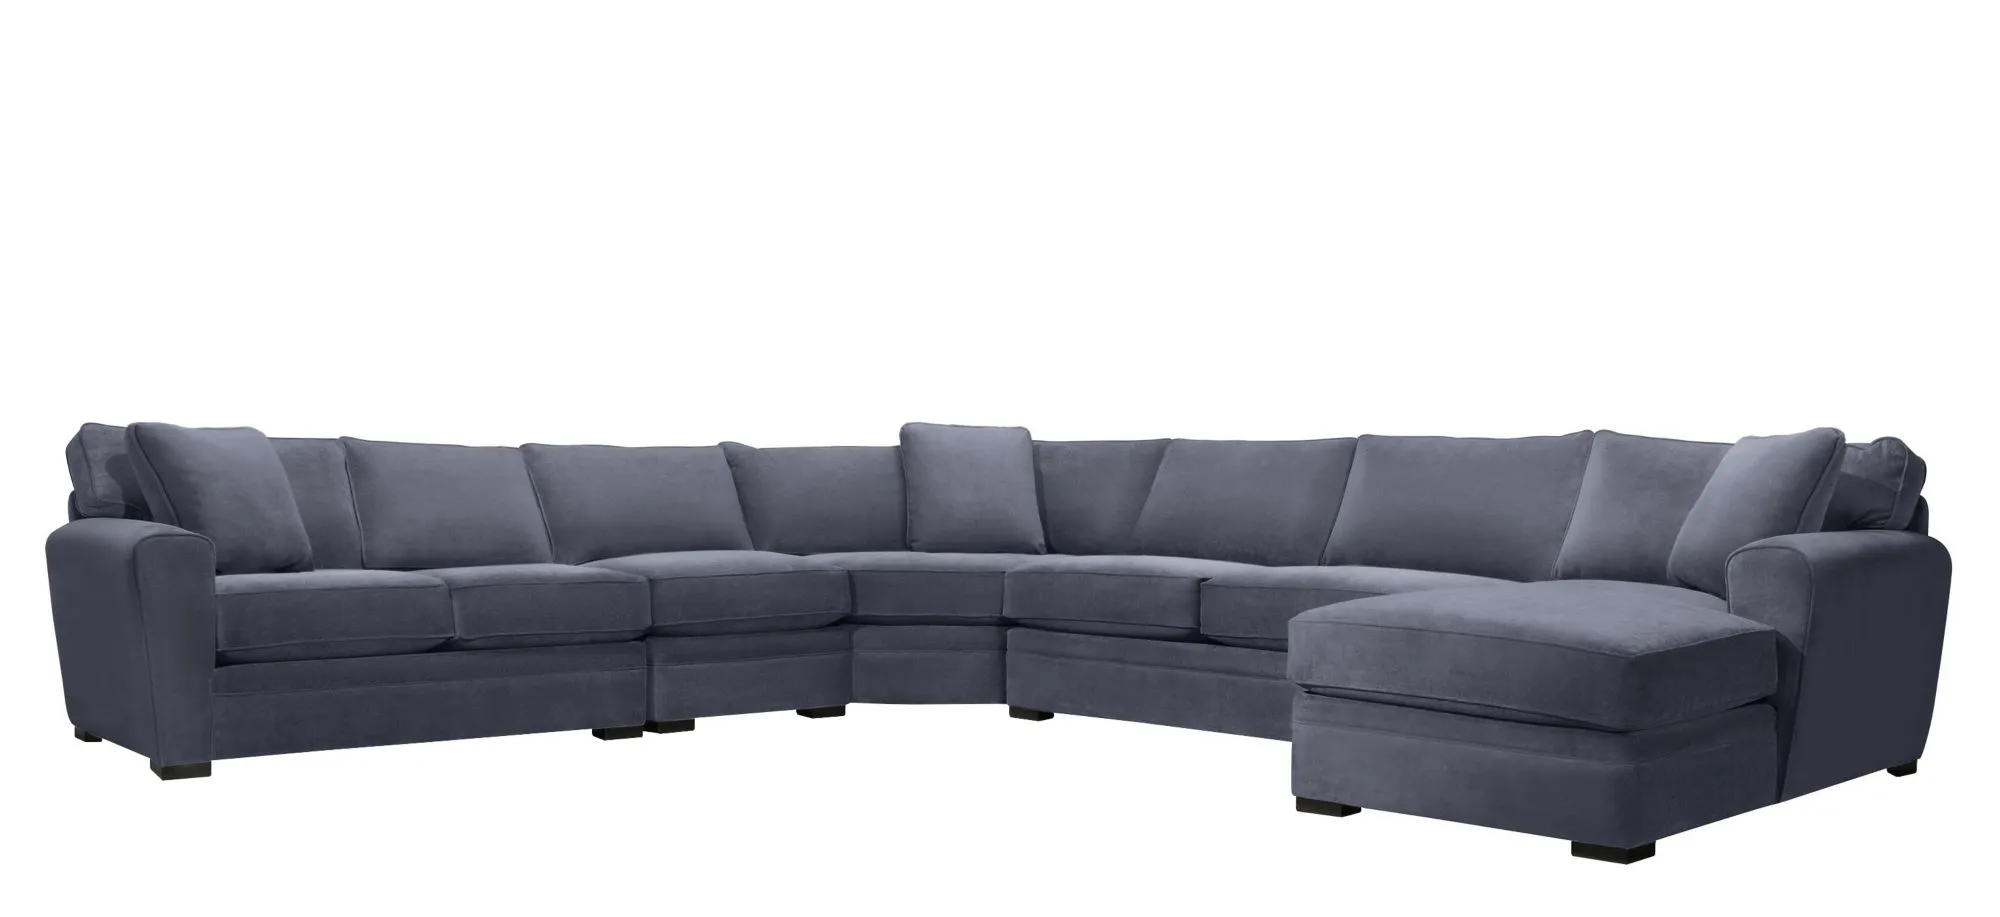 Artemis II 5-pc. Right Hand Facing Sectional Sofa in Gypsy Slate by Jonathan Louis